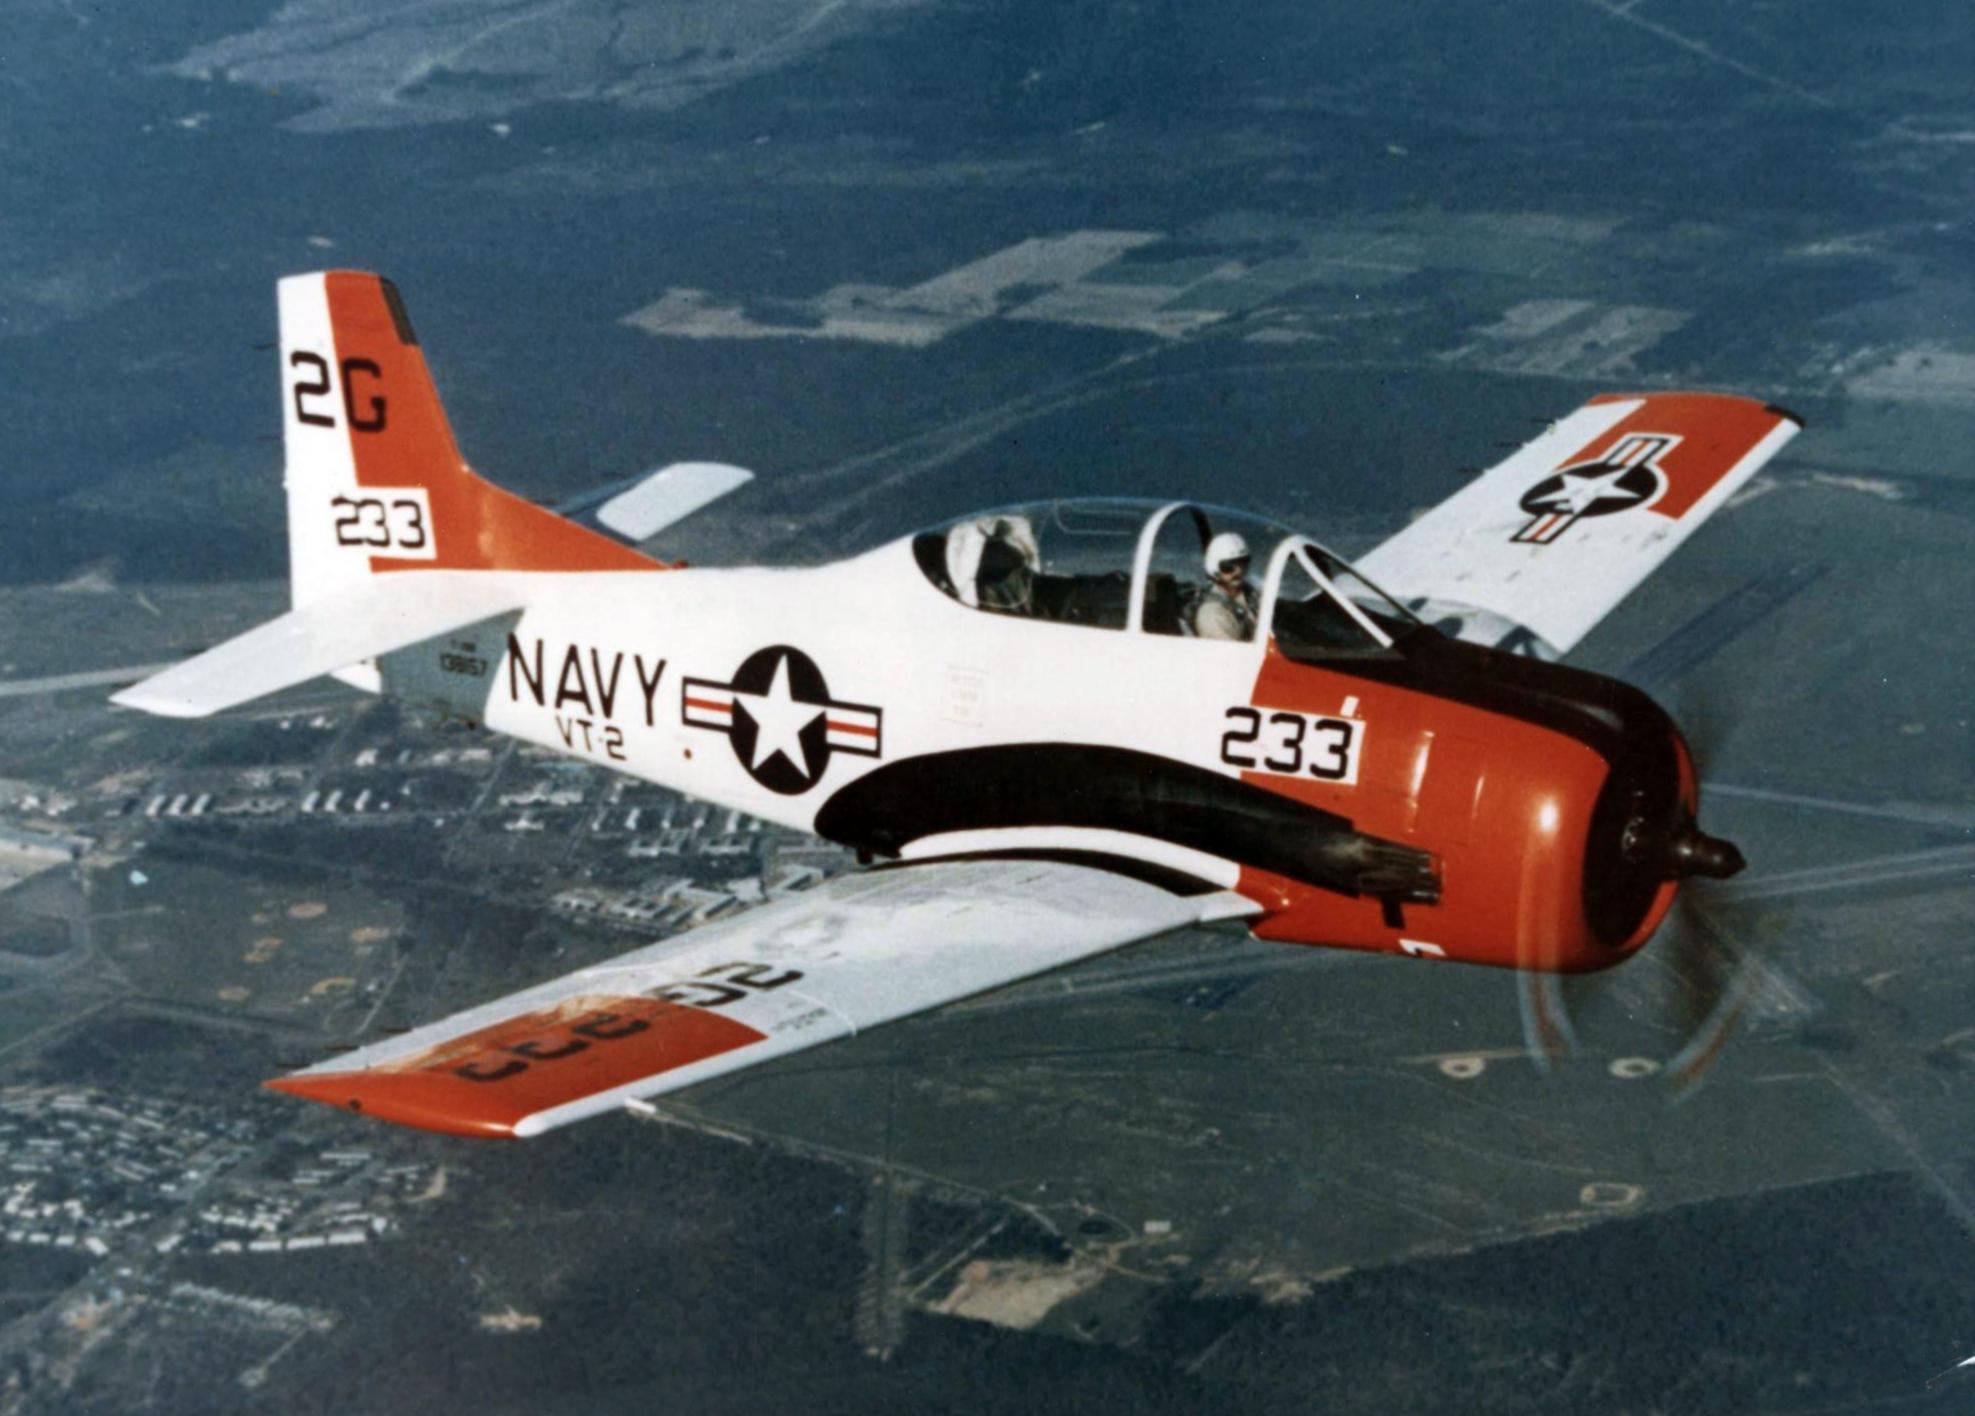 T 28 Trojan Rc Plane For Sale: Purchase Your Own T-28 Trojan RC Plane at Affordable Prices